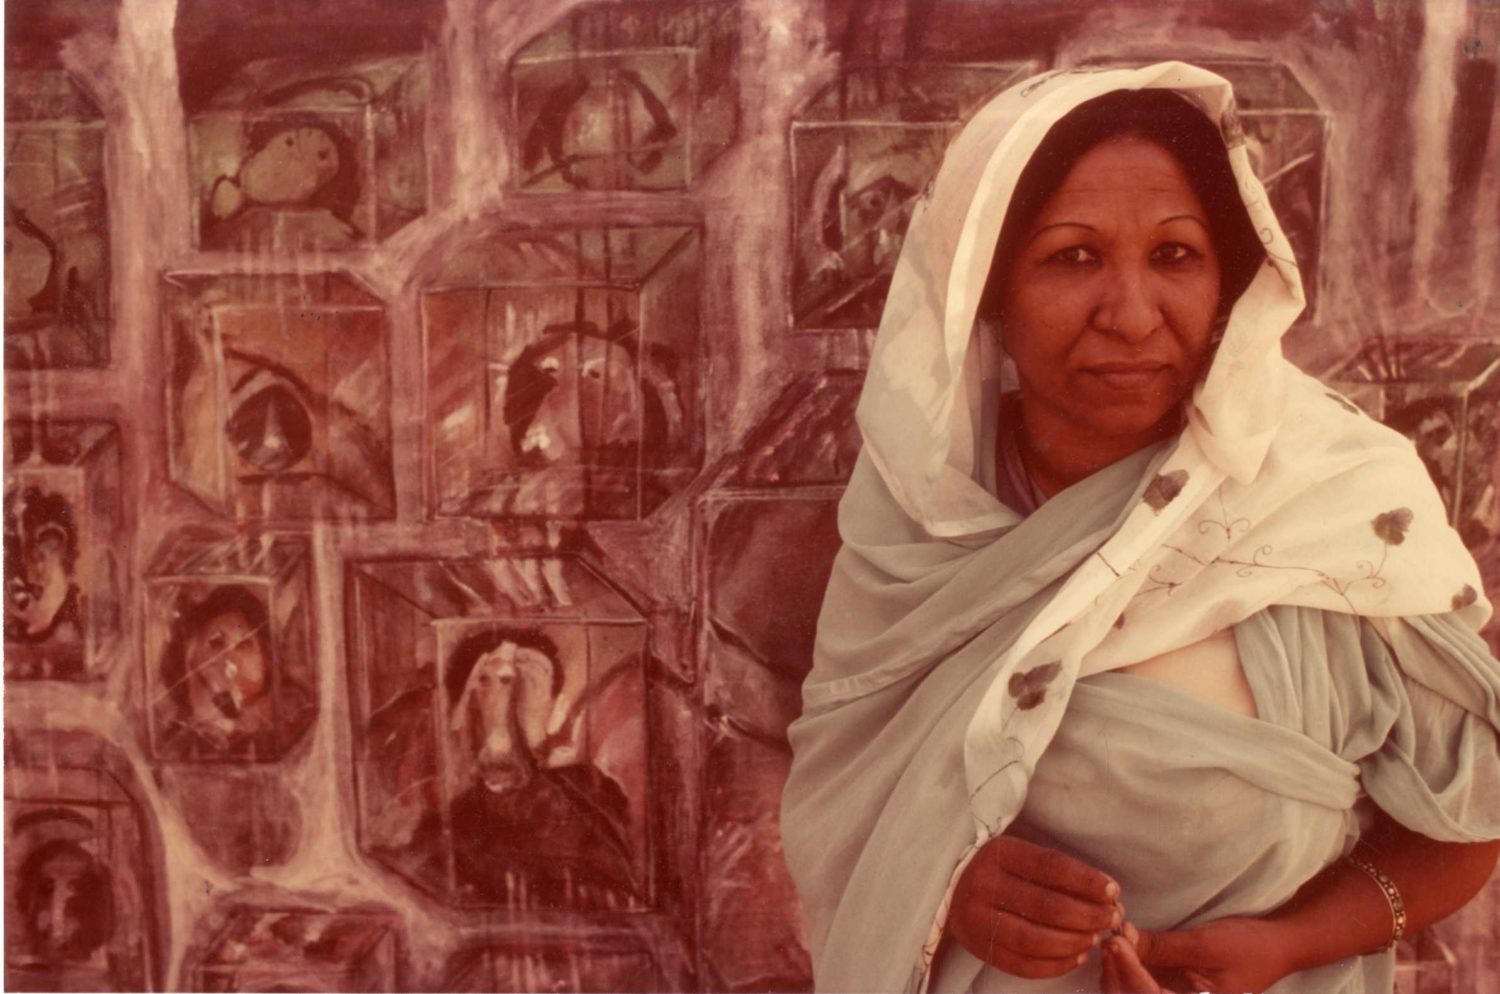 Kamala Ibrahim Ishaq- Archives of Women artists, Research and Exhibitions